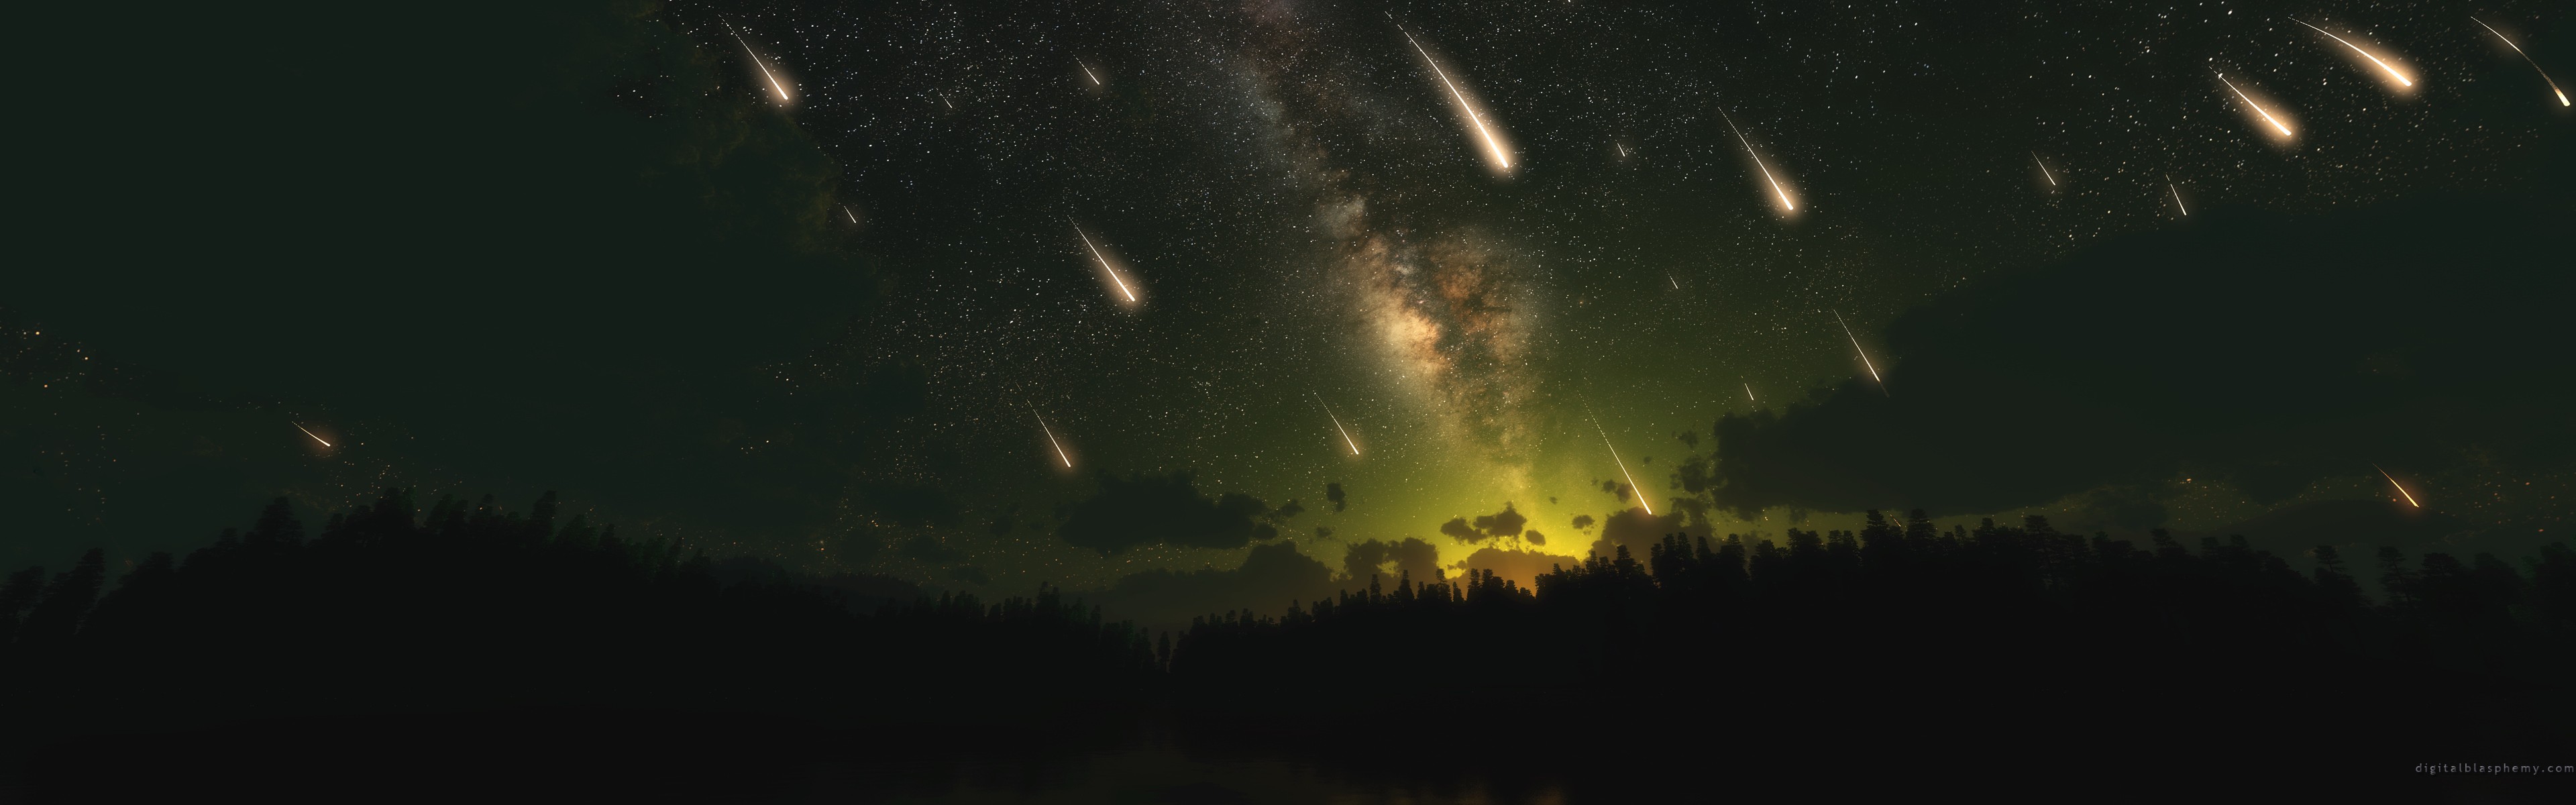 Wallpaper Outer Space Dual Cosmos Meteorite Skyscapes Meteor